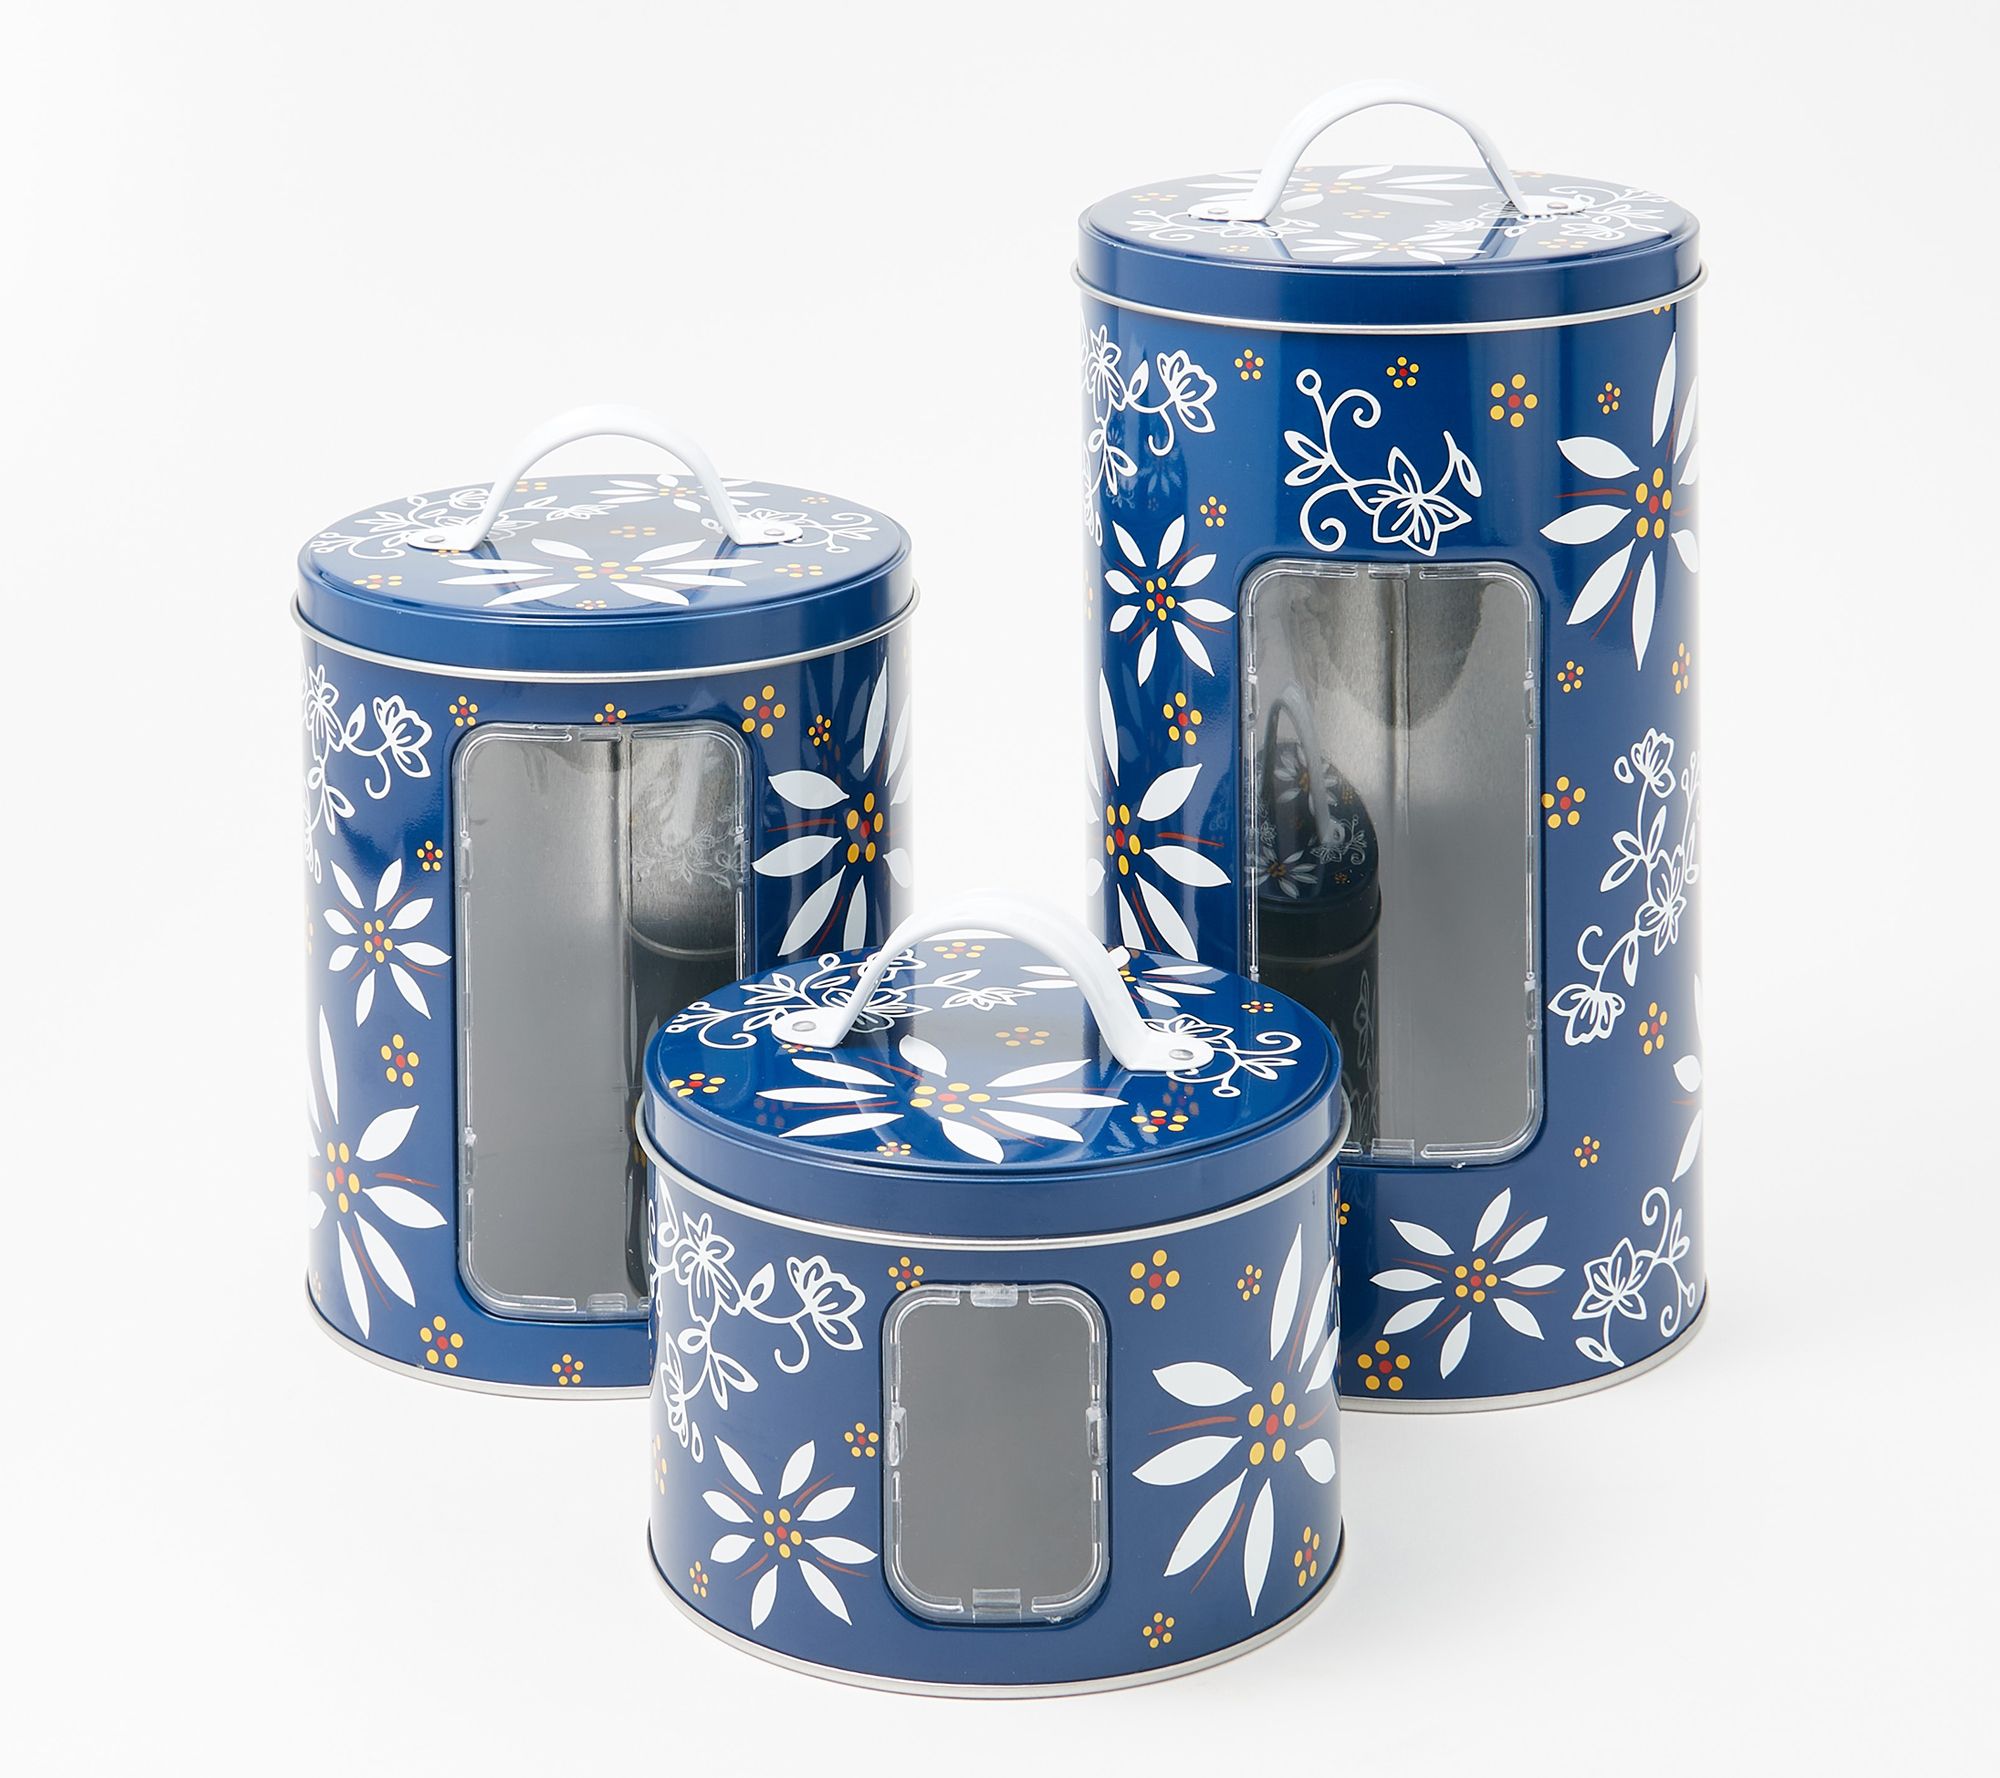 Flour Canister White Tin W Airtight Lid, Large Flour Containers